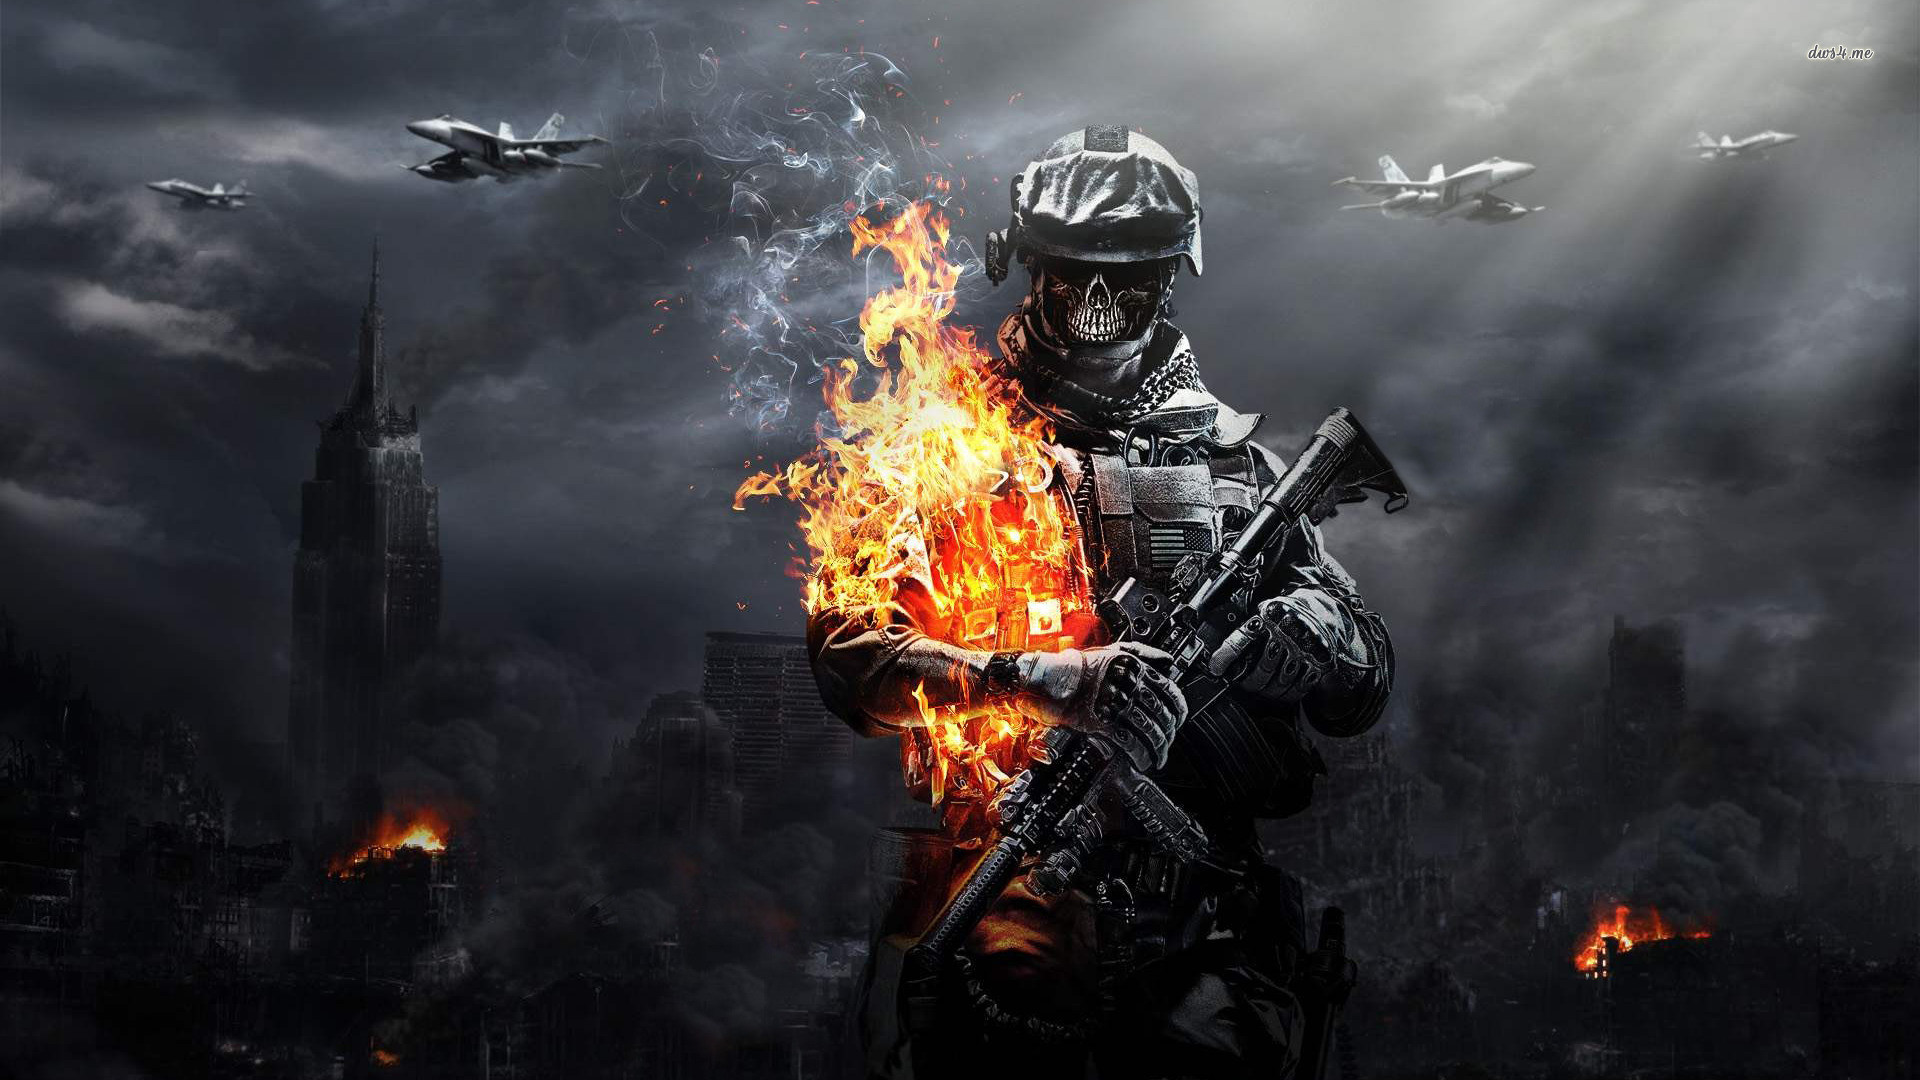 1920x1080 HD Wallpapers Battlefield 4 80+ images